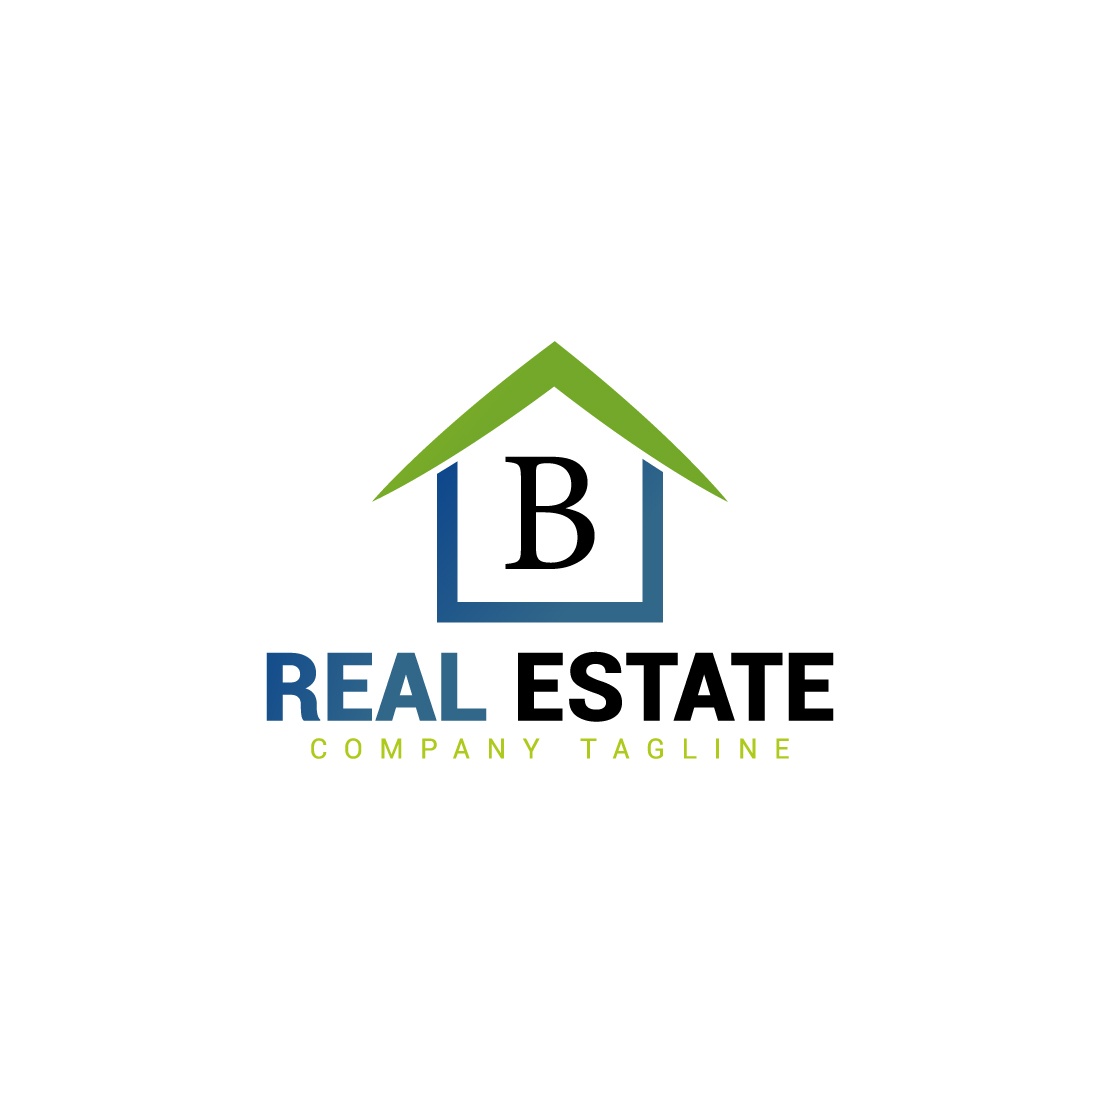 Real estate logo with green, dark blue color and B letter preview image.